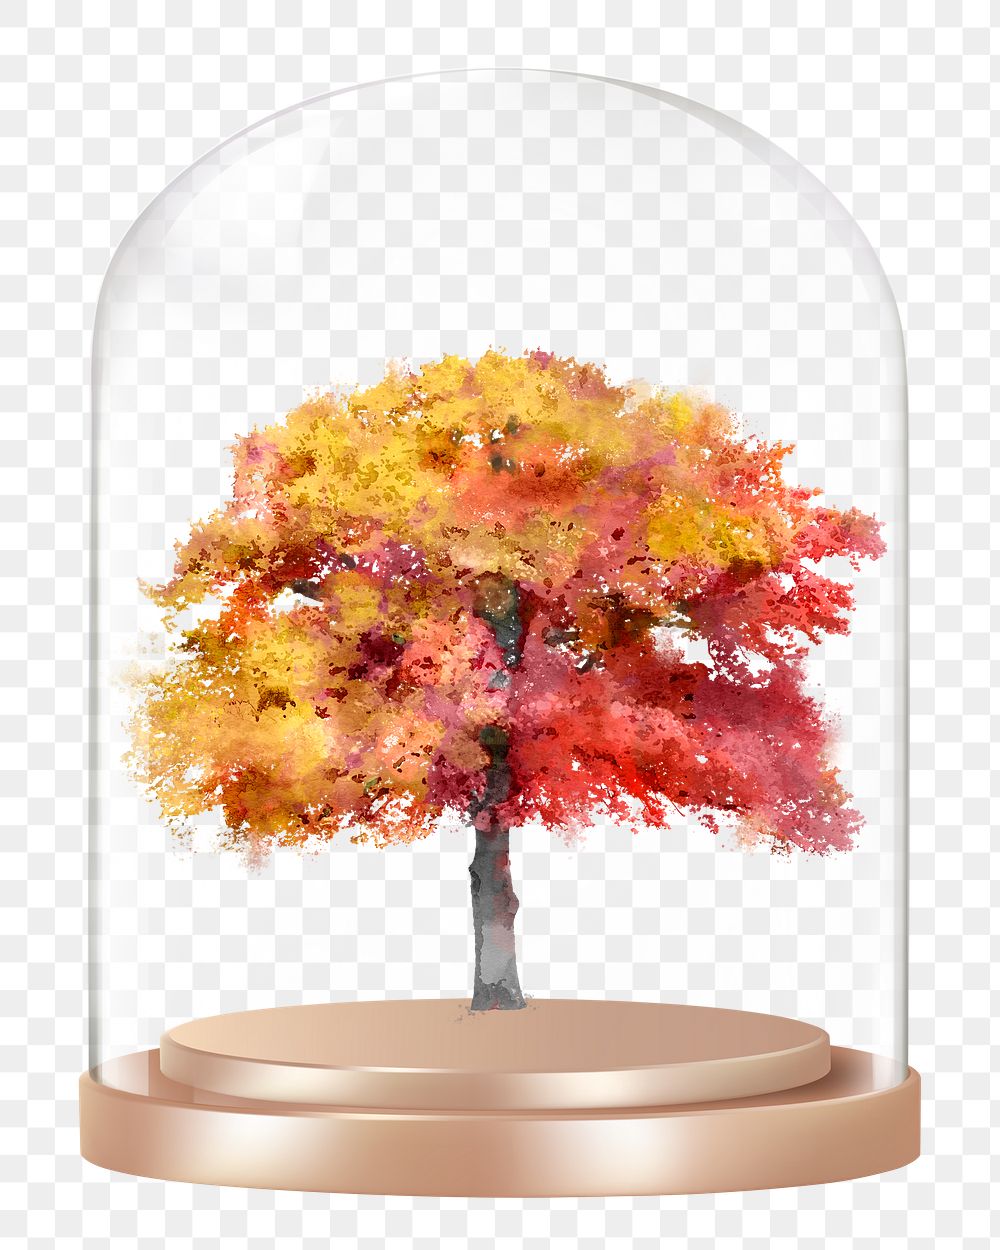 Autumn tree png glass dome sticker, seasonal aesthetic concept art, transparent background